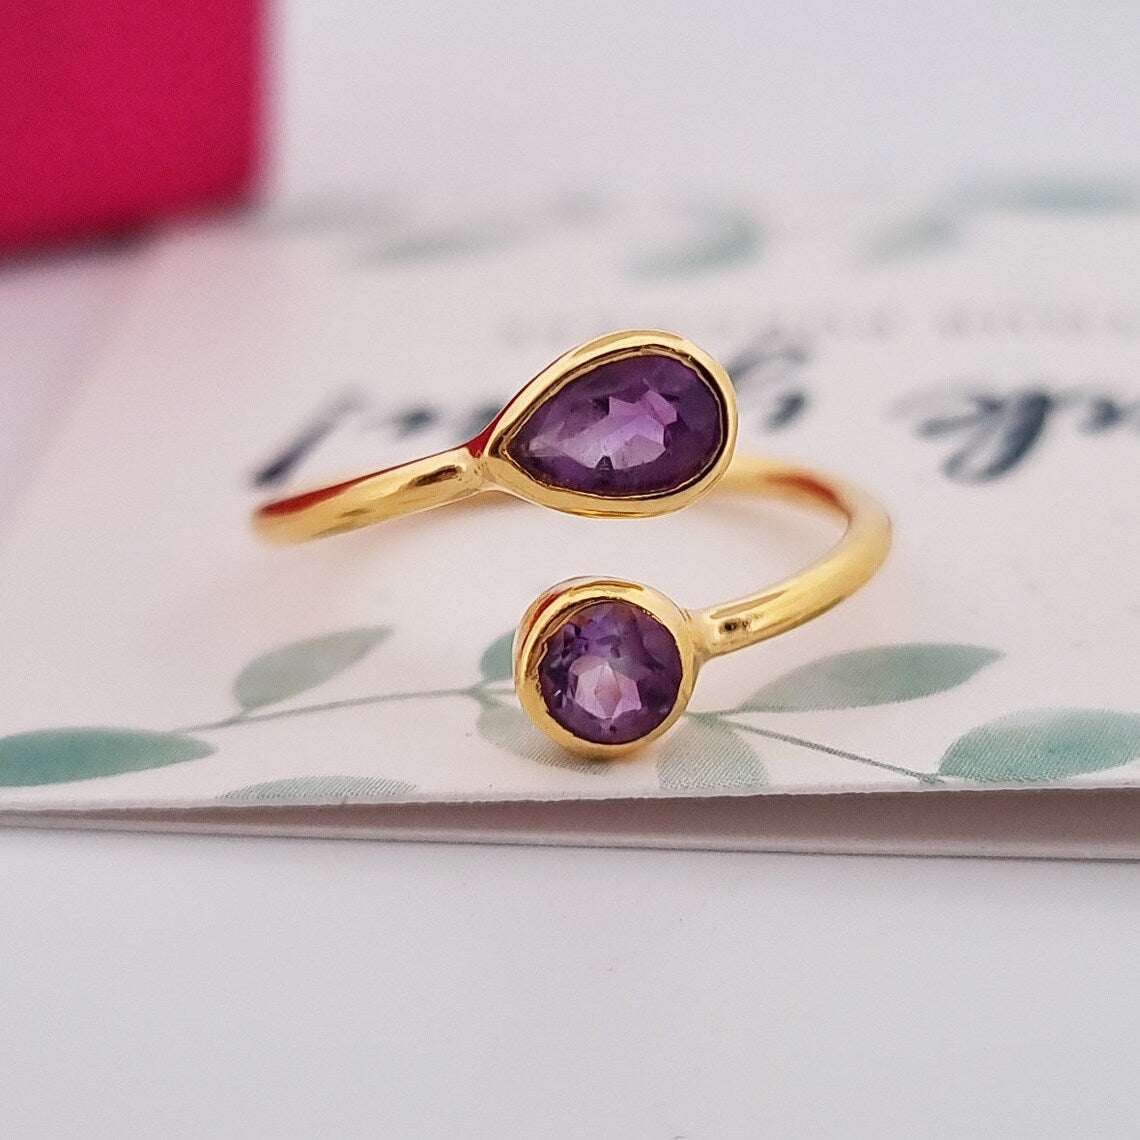 925 Sterling Silver Amethyst Round & Pear Adjustable Ring - Gold Plated Amethyst Ring - February Birthstone Ring - promise ring, wedding ring, friendship ring